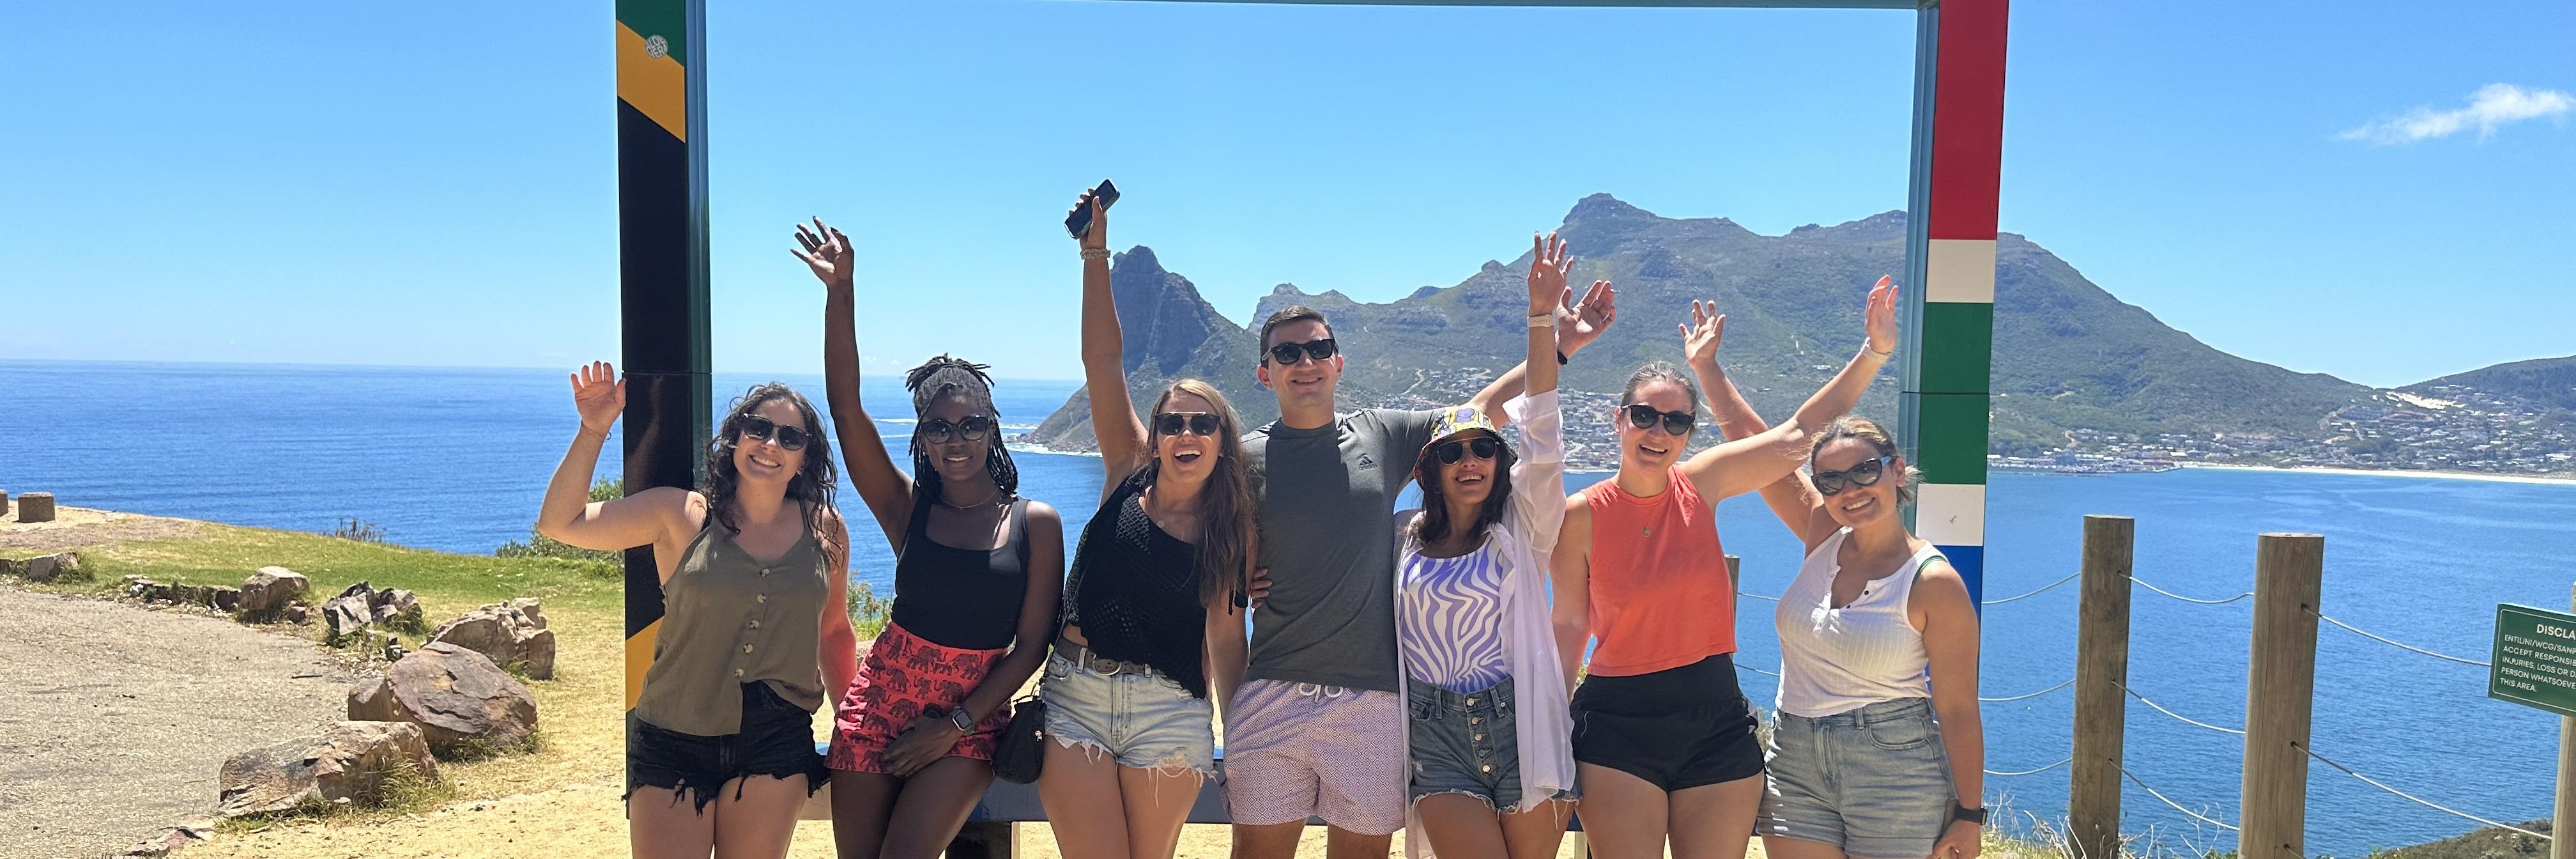 Seven students stand on an overlook by the water in Cape Town, South Africa